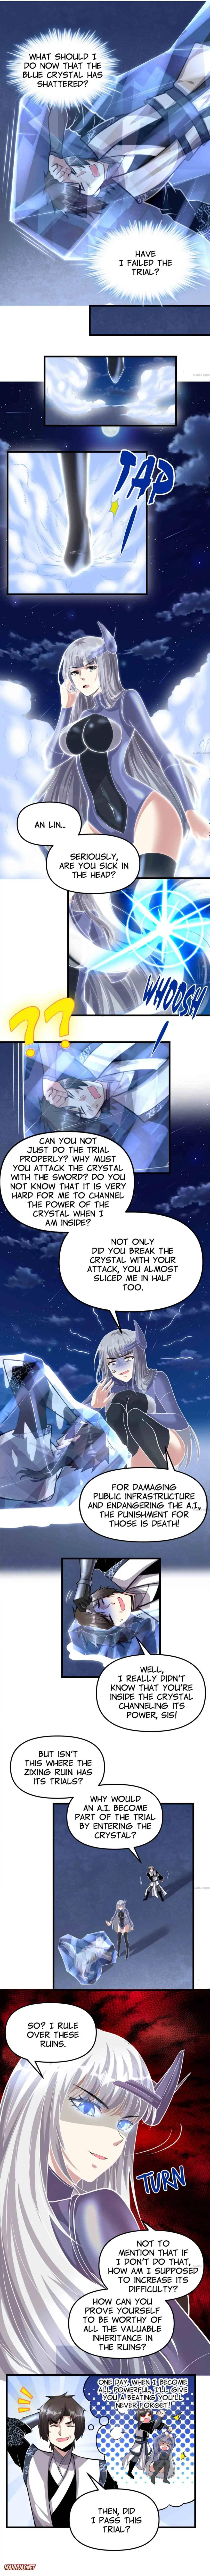 Cultivation, Kidding Me?! Chapter 228